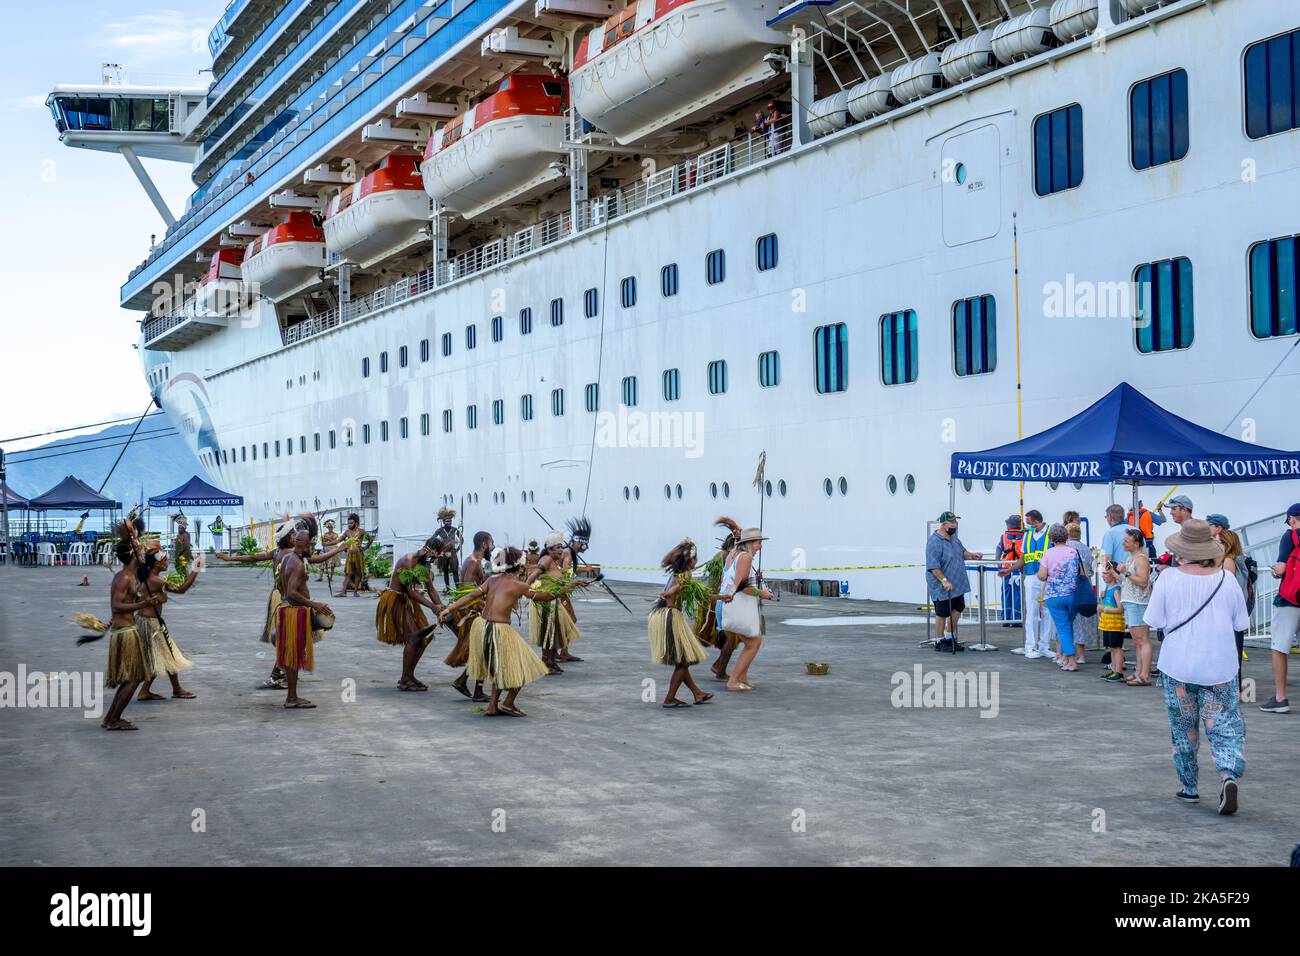 Indigenous dancers in traditional costume greet the arrival of a cruise ship, Alotau, Milne Bay Province, Papua New Guinea Stock Photo